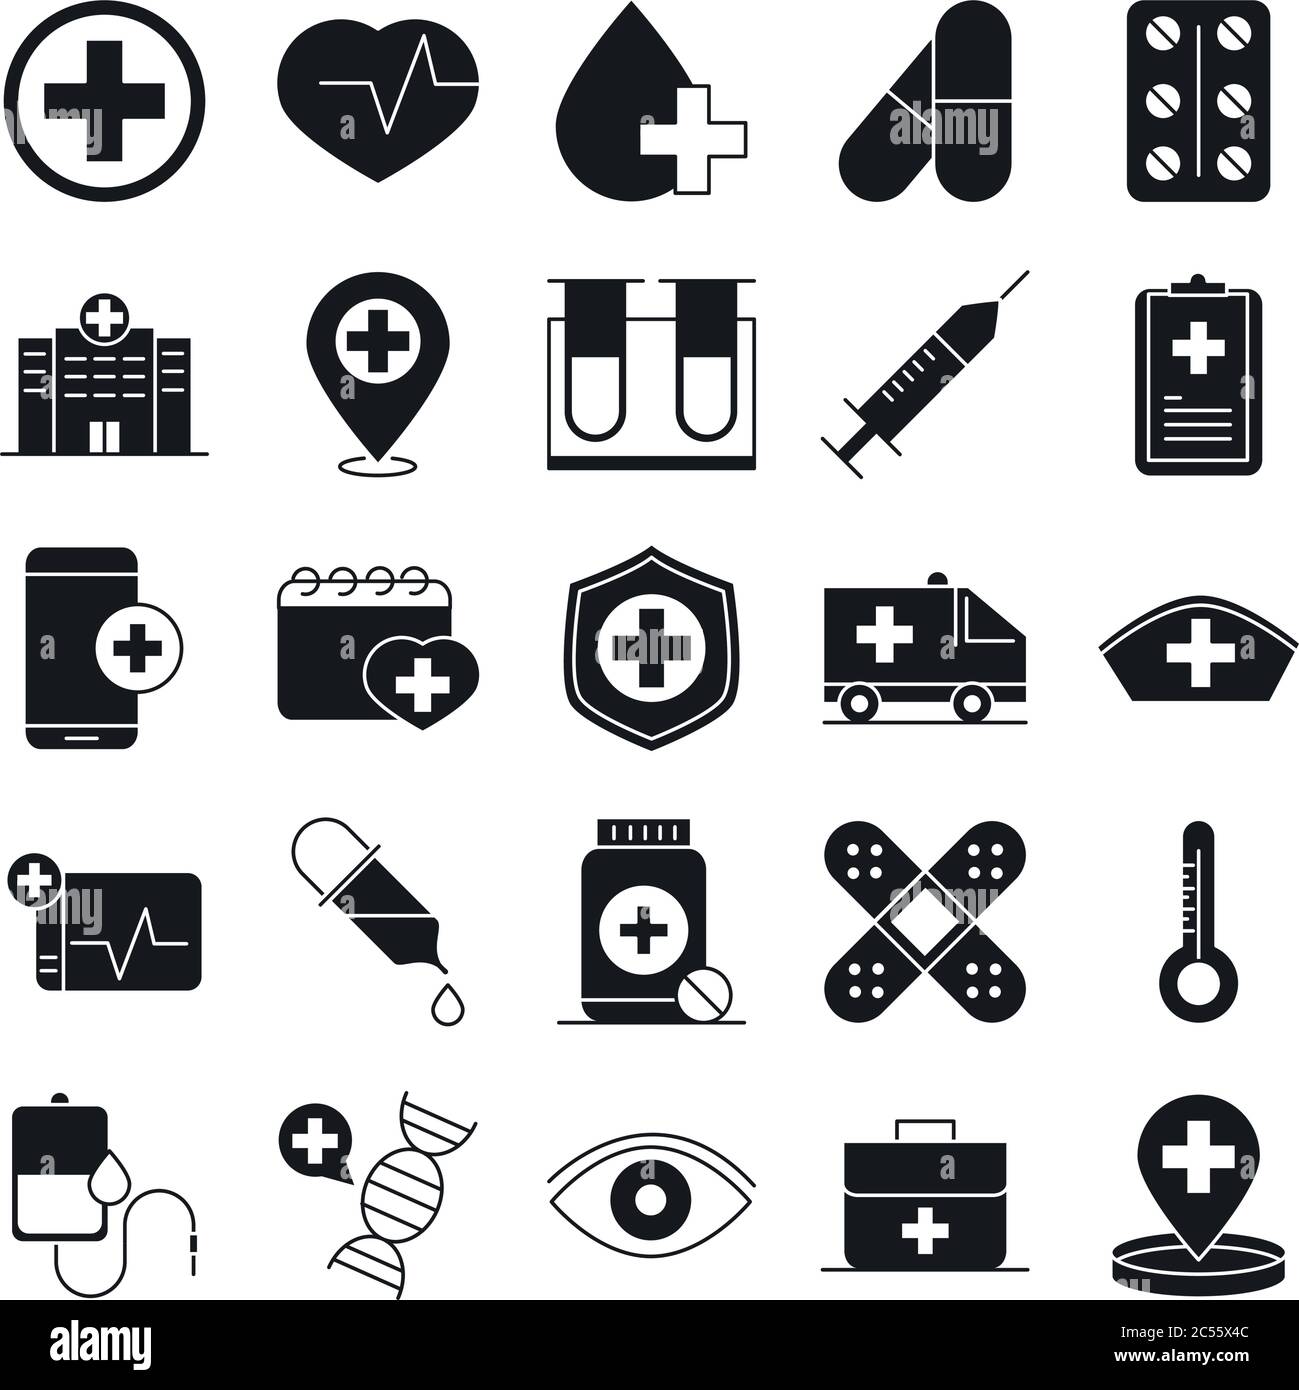 healthcare medical and hospital pictogram silhouette style icon s set ...